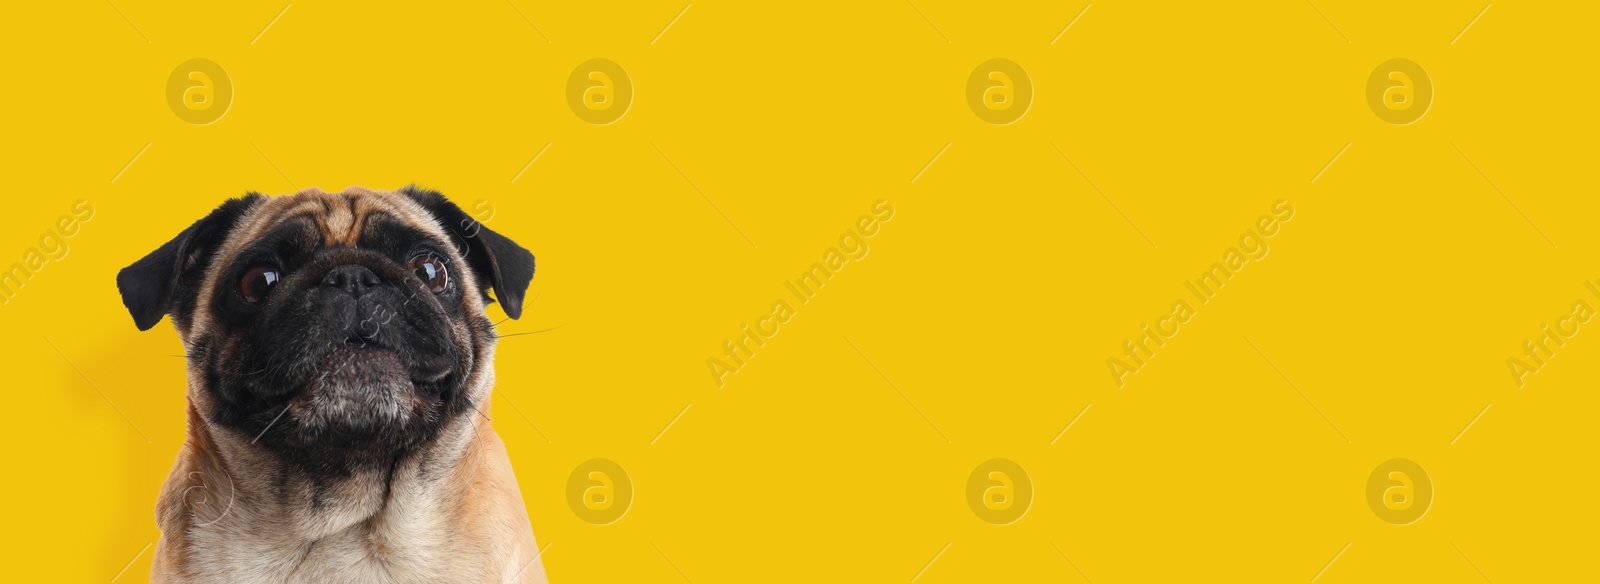 Image of Happy pet. Cute Pug dog smiling on yellow background, space for text. Banner design